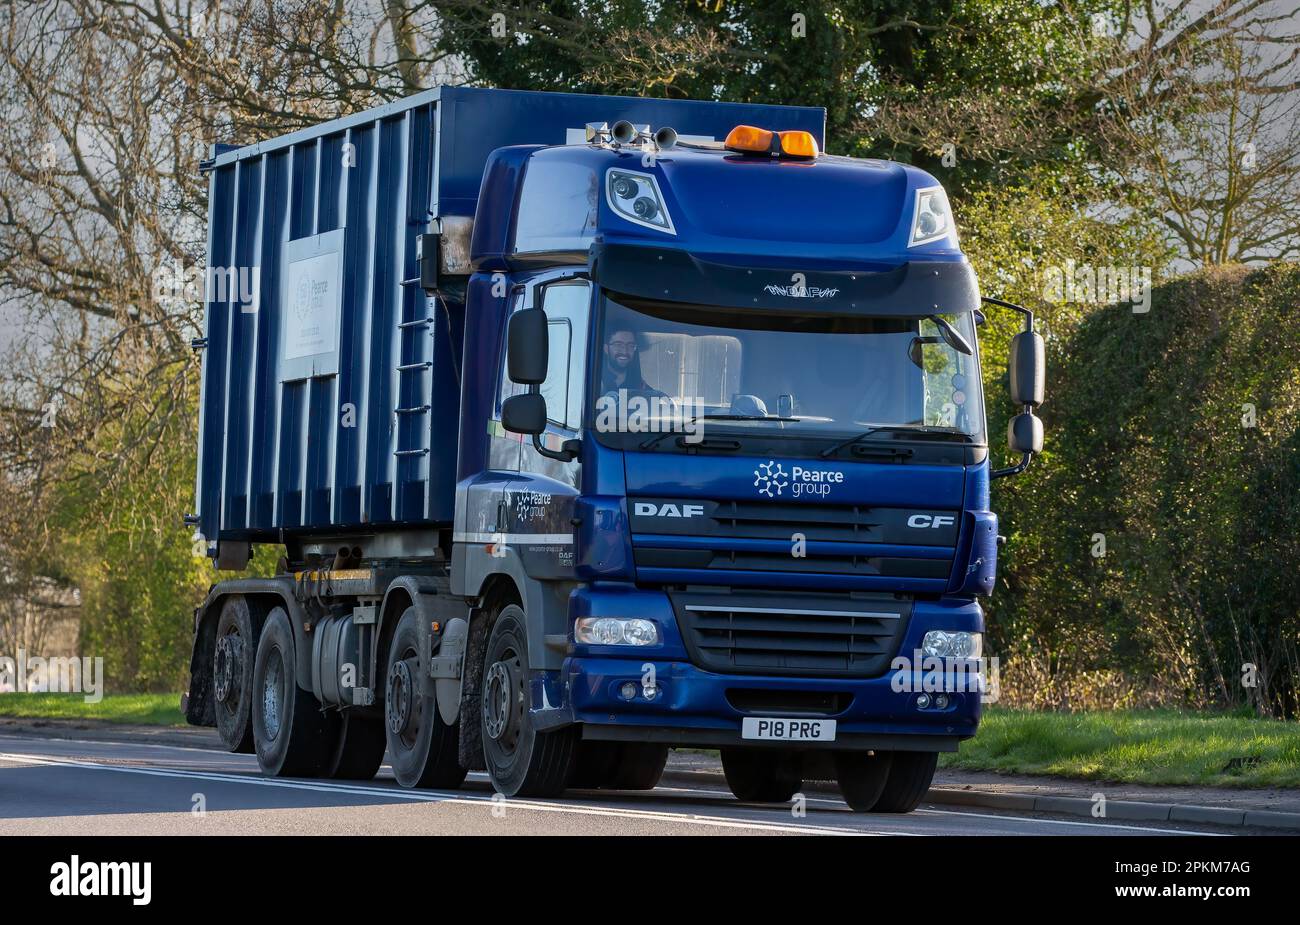 Bicester,Oxon, UK - April 7th 2023. 2013 DAF TRUCKS  FAX CF 8X2 lorry travelling on an English country road Stock Photo